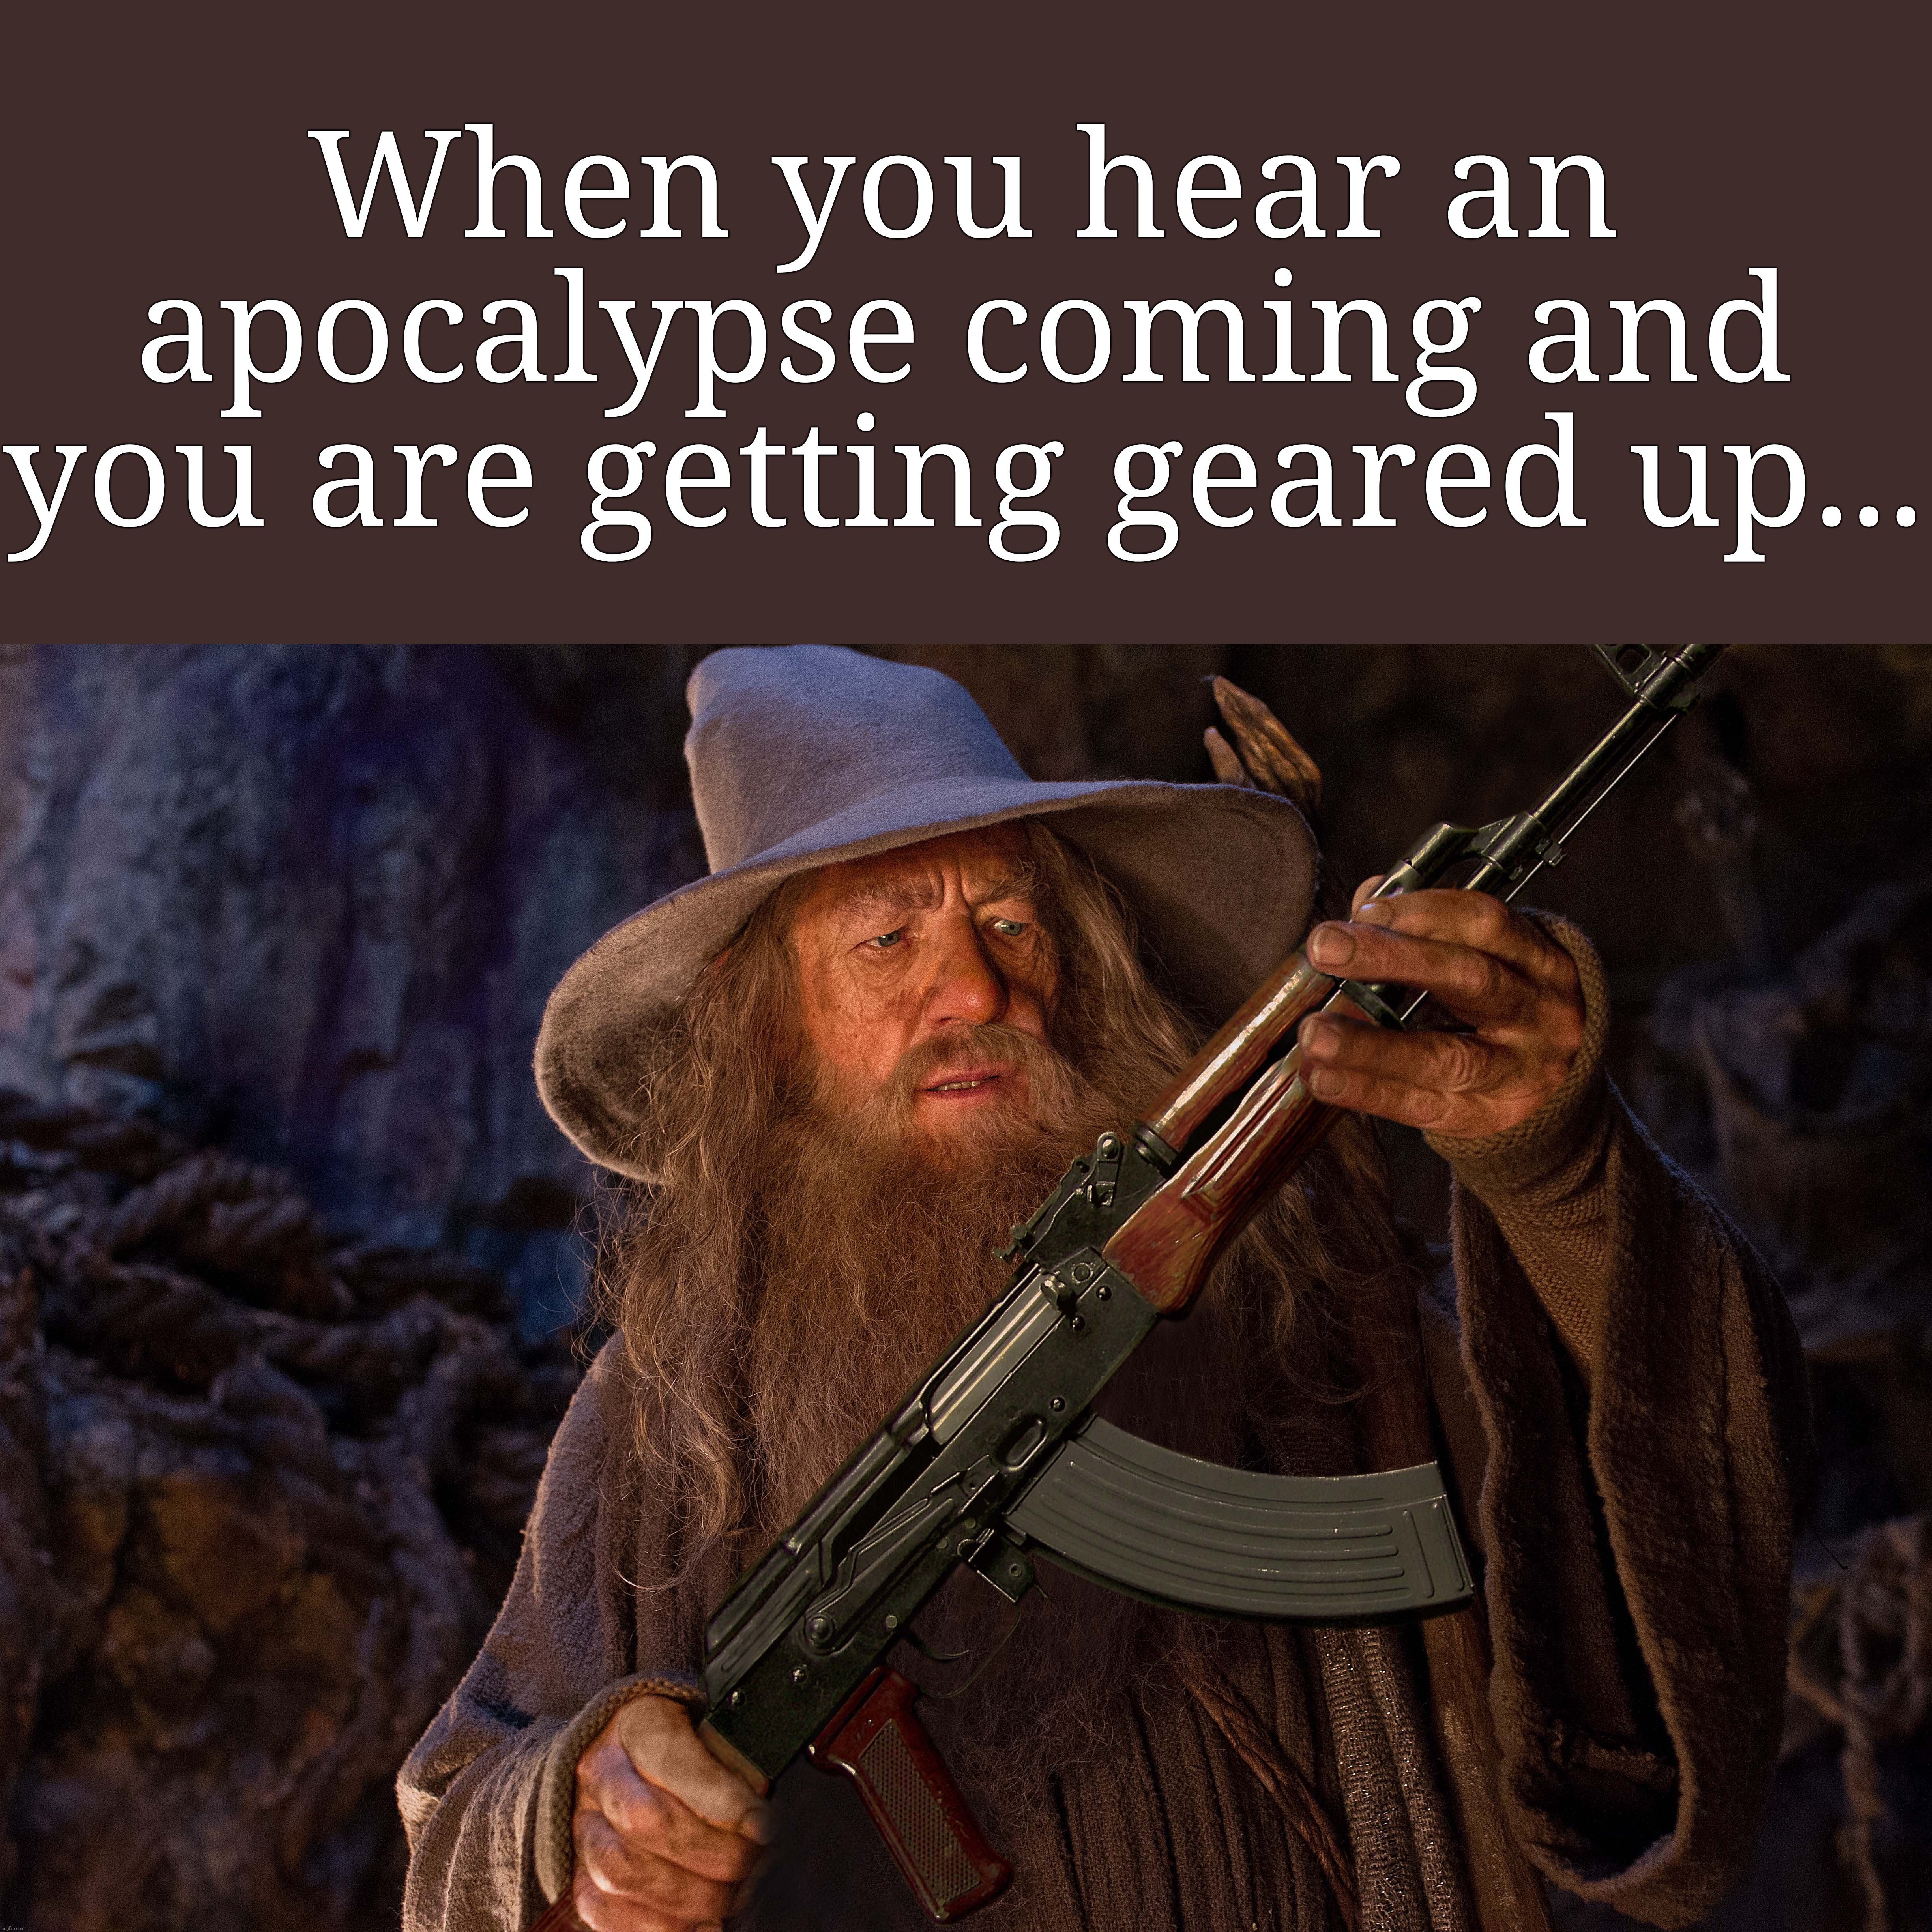 I just thought that it would happen... | When you hear an apocalypse coming and you are getting geared up... | image tagged in confused gandalf,the lord of the rings,memes,ak-47,funny,relatable | made w/ Imgflip meme maker